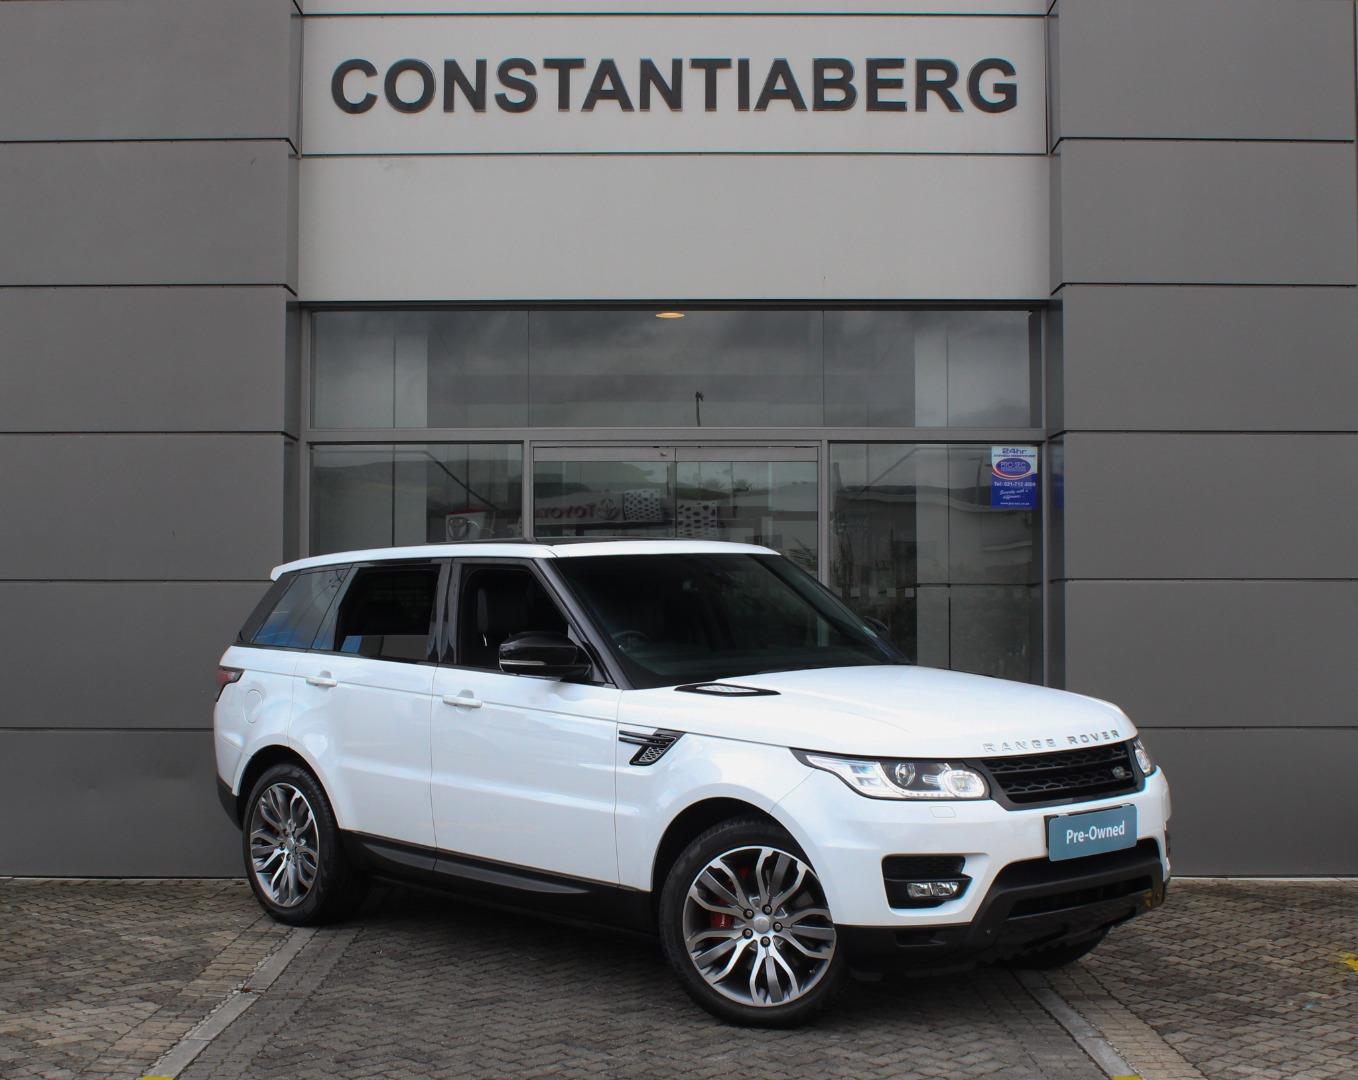 2015 LAND ROVER Range Rover Sport HSE Dynamic Supercharged